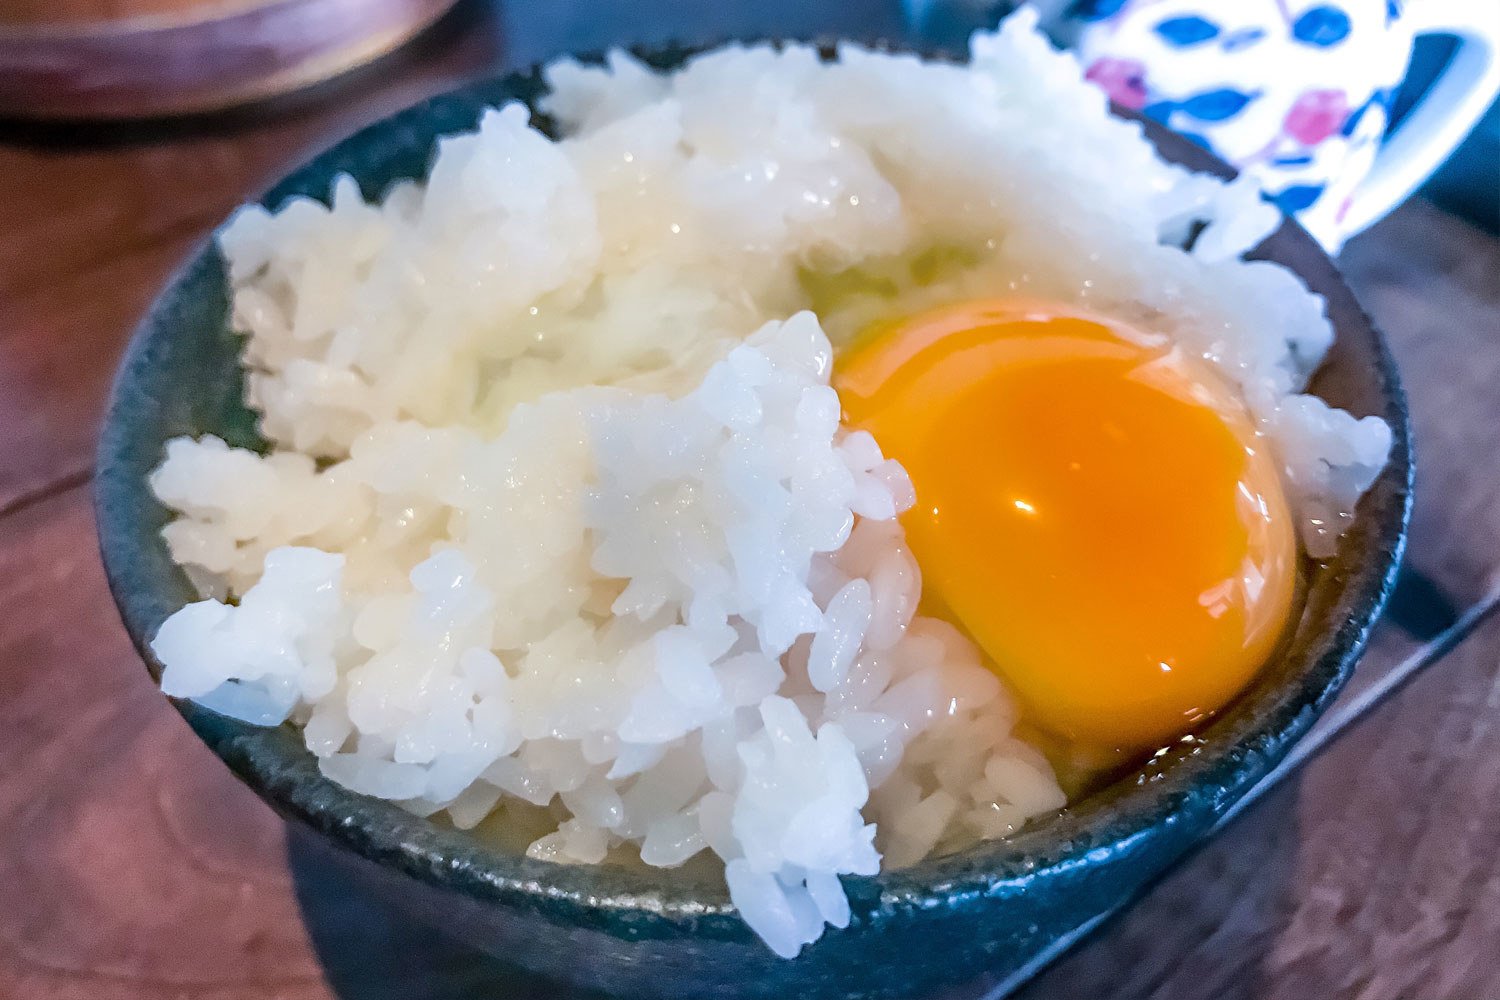 An uncooked egg over white rice.